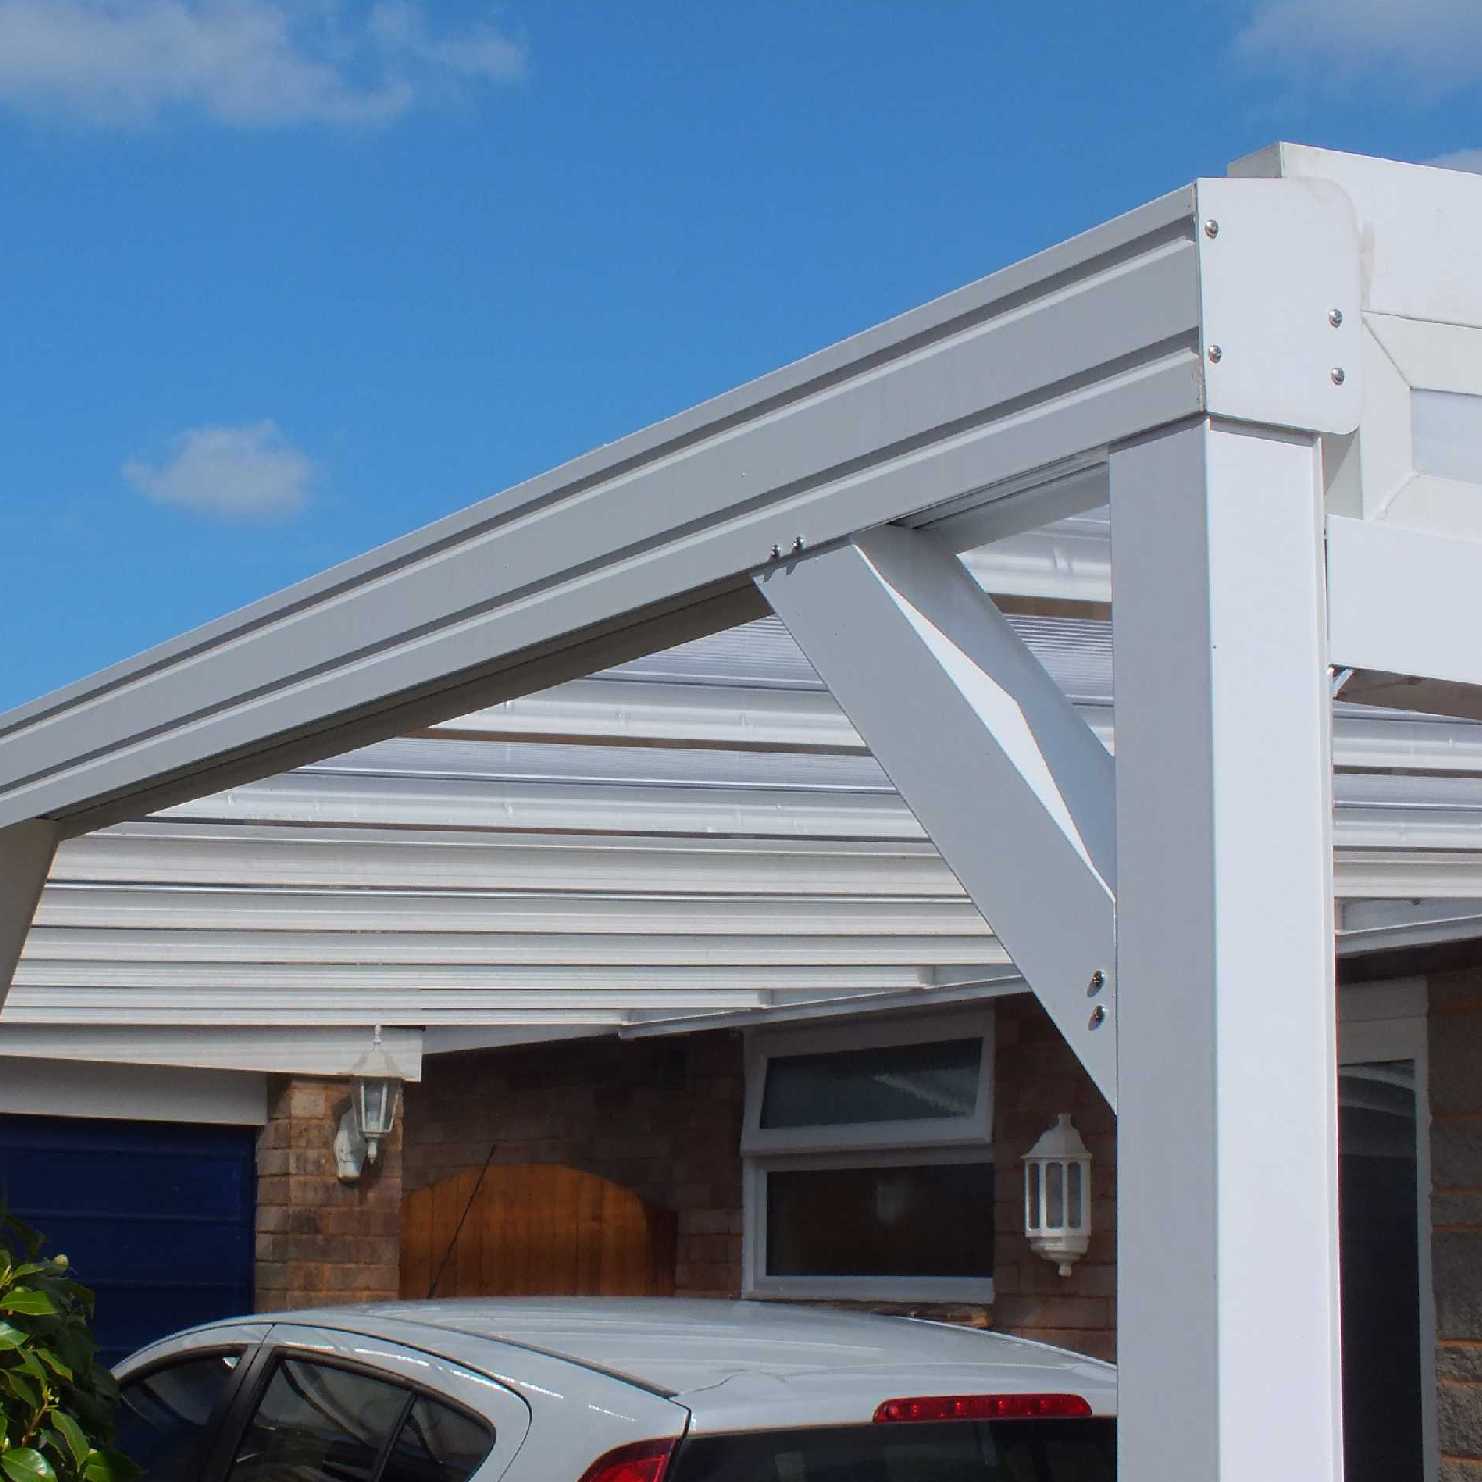 Great deals on Omega Smart Lean-To Canopy, White with 16mm Polycarbonate Glazing - 6.3m (W) x 3.5m (P), (4) Supporting Posts